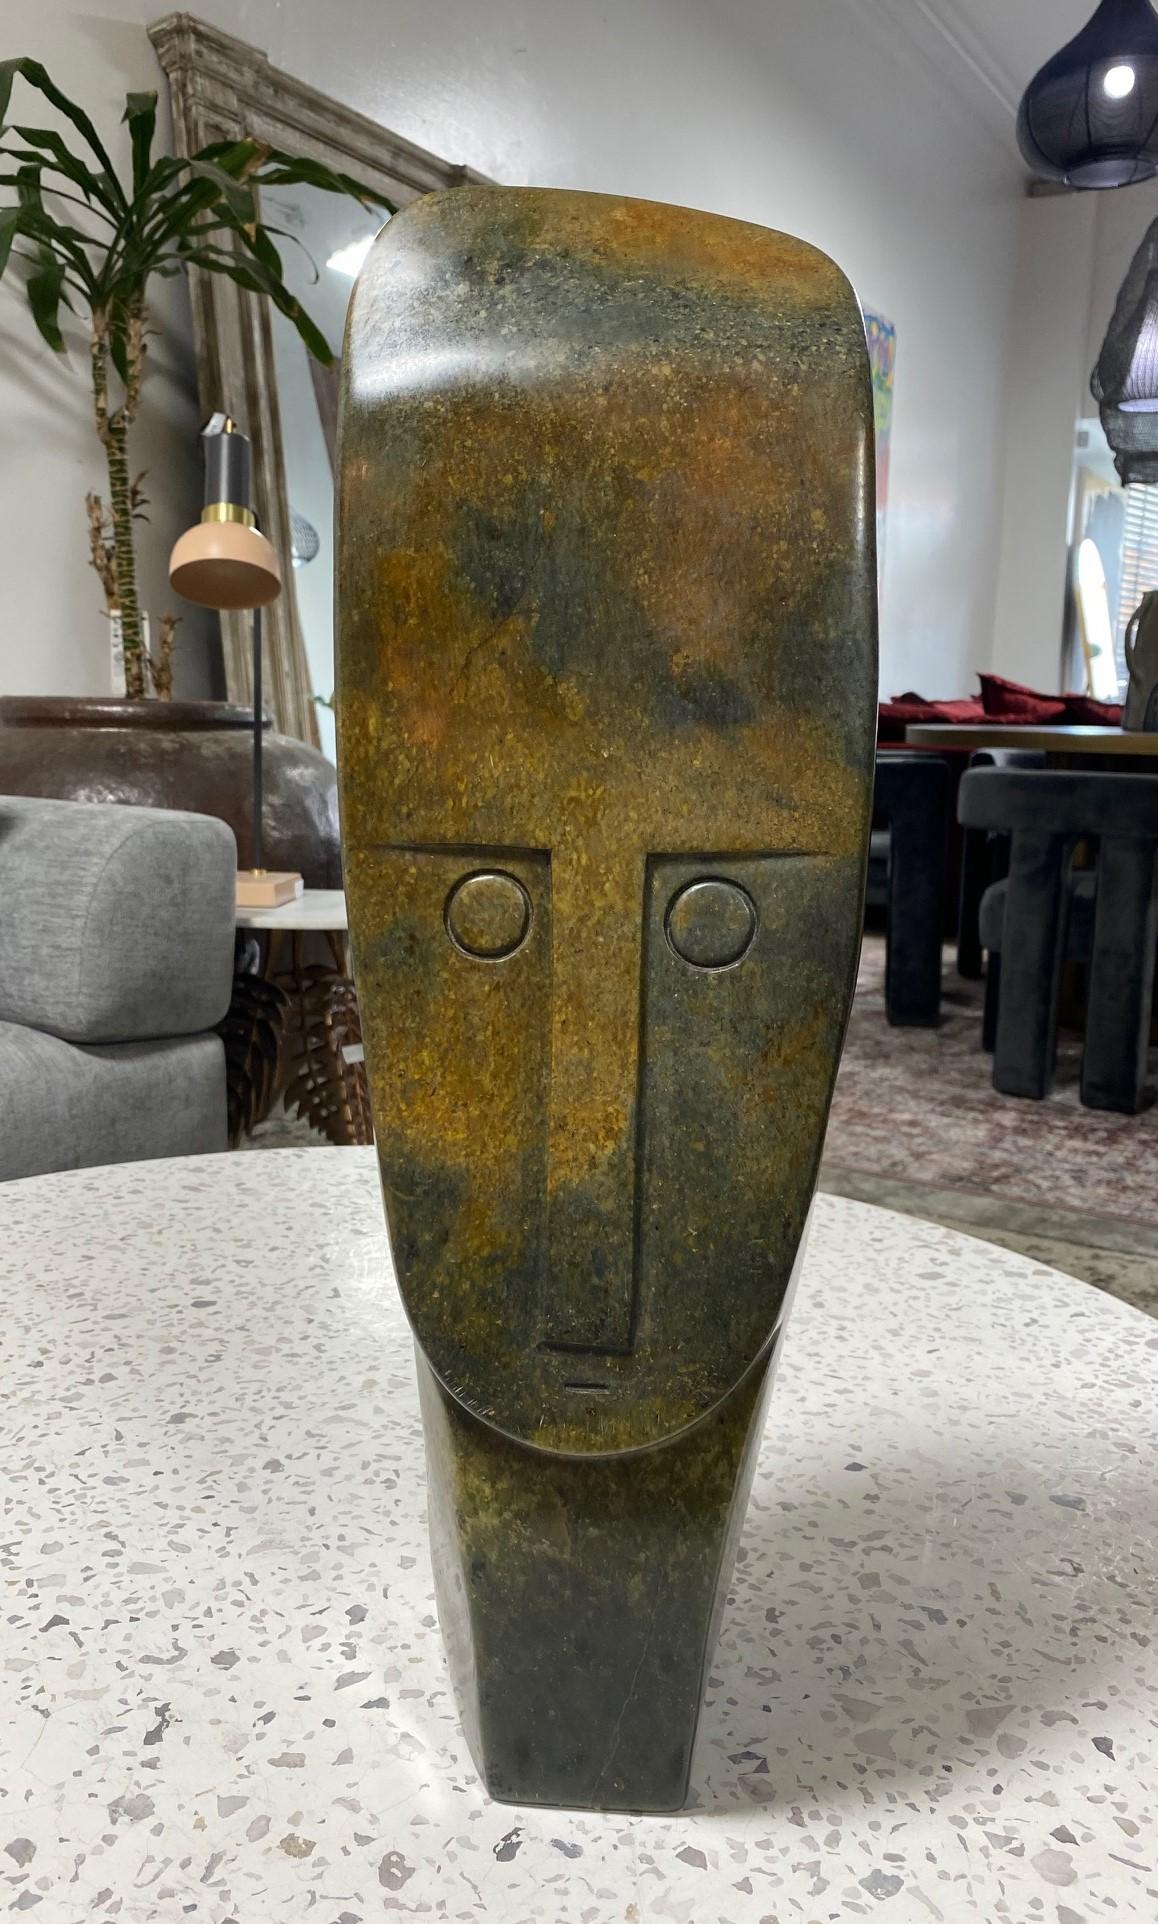 A beautiful, wonderfully executed sculpture by renowned African sculptor/artist Henry Munyaradzi (1931-1998). He was also known as Henry Mudzengerere/Mzengerere) who lived and worked in Zimbabwe. 

This piece is carved from serpentine stone which